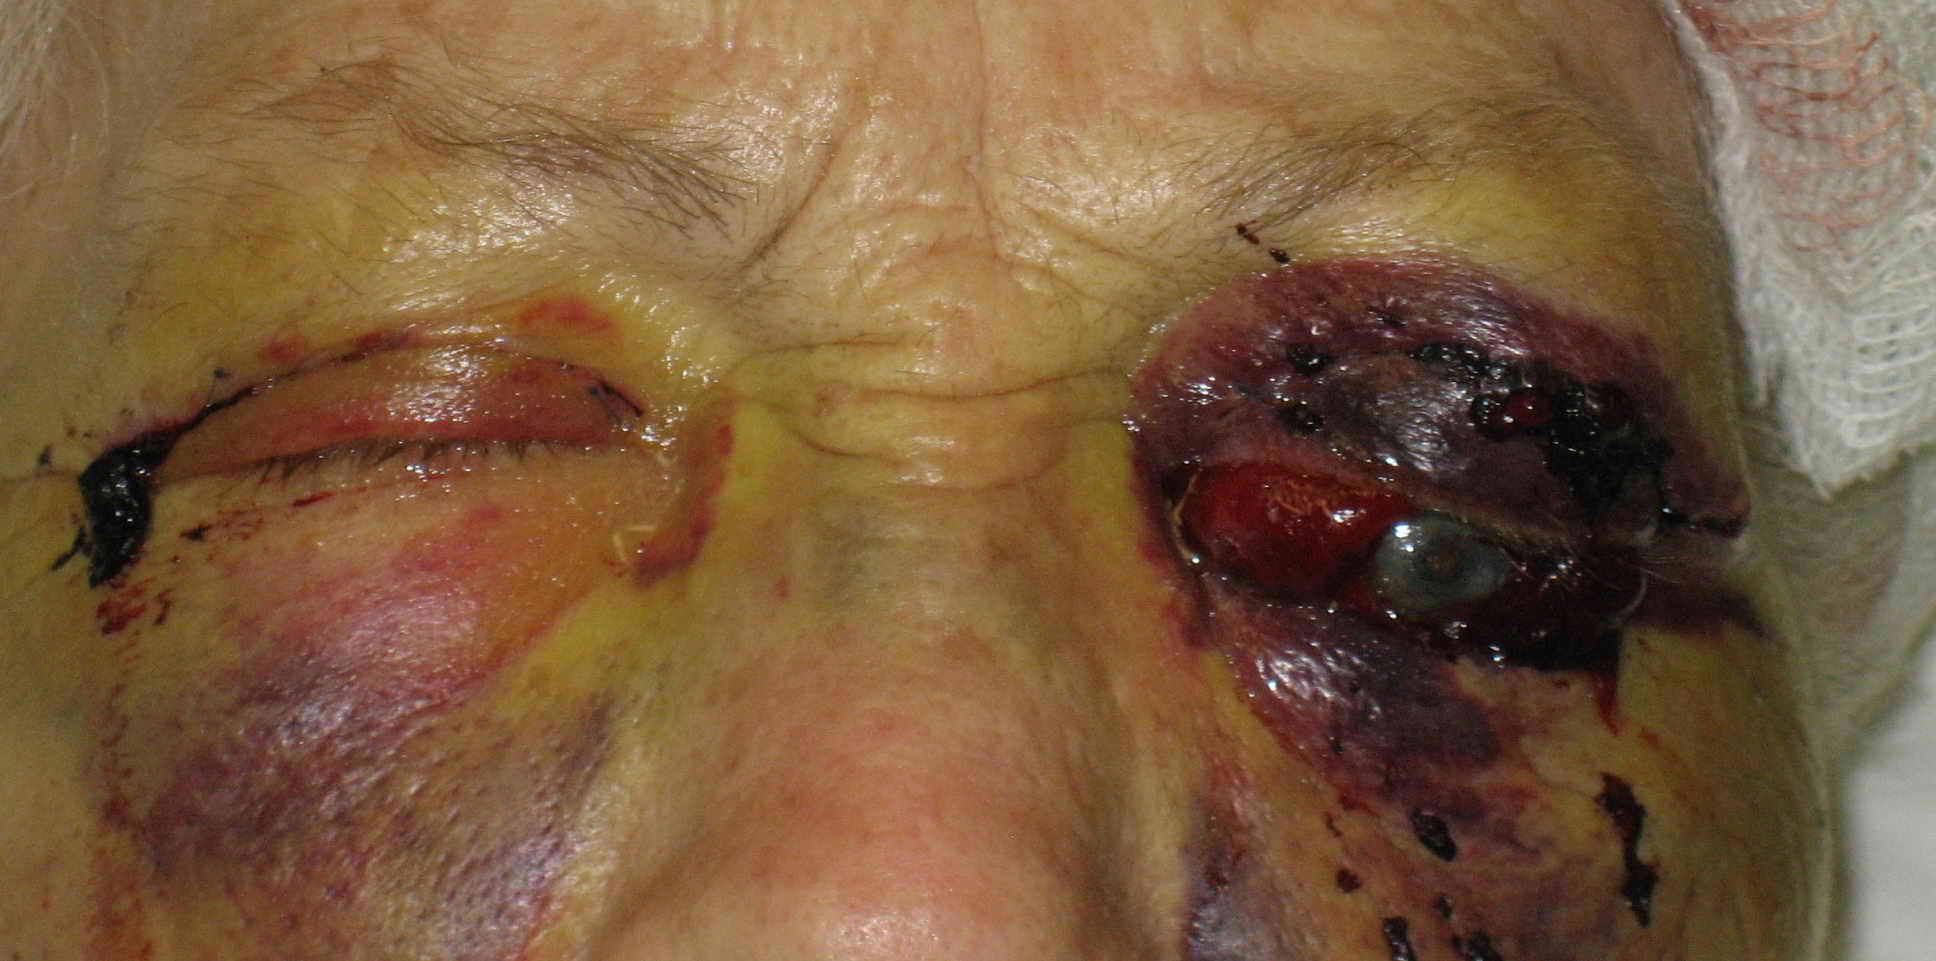 Patient developed severe pain in the left eye and orbit after uneventful upper blepharoplasty